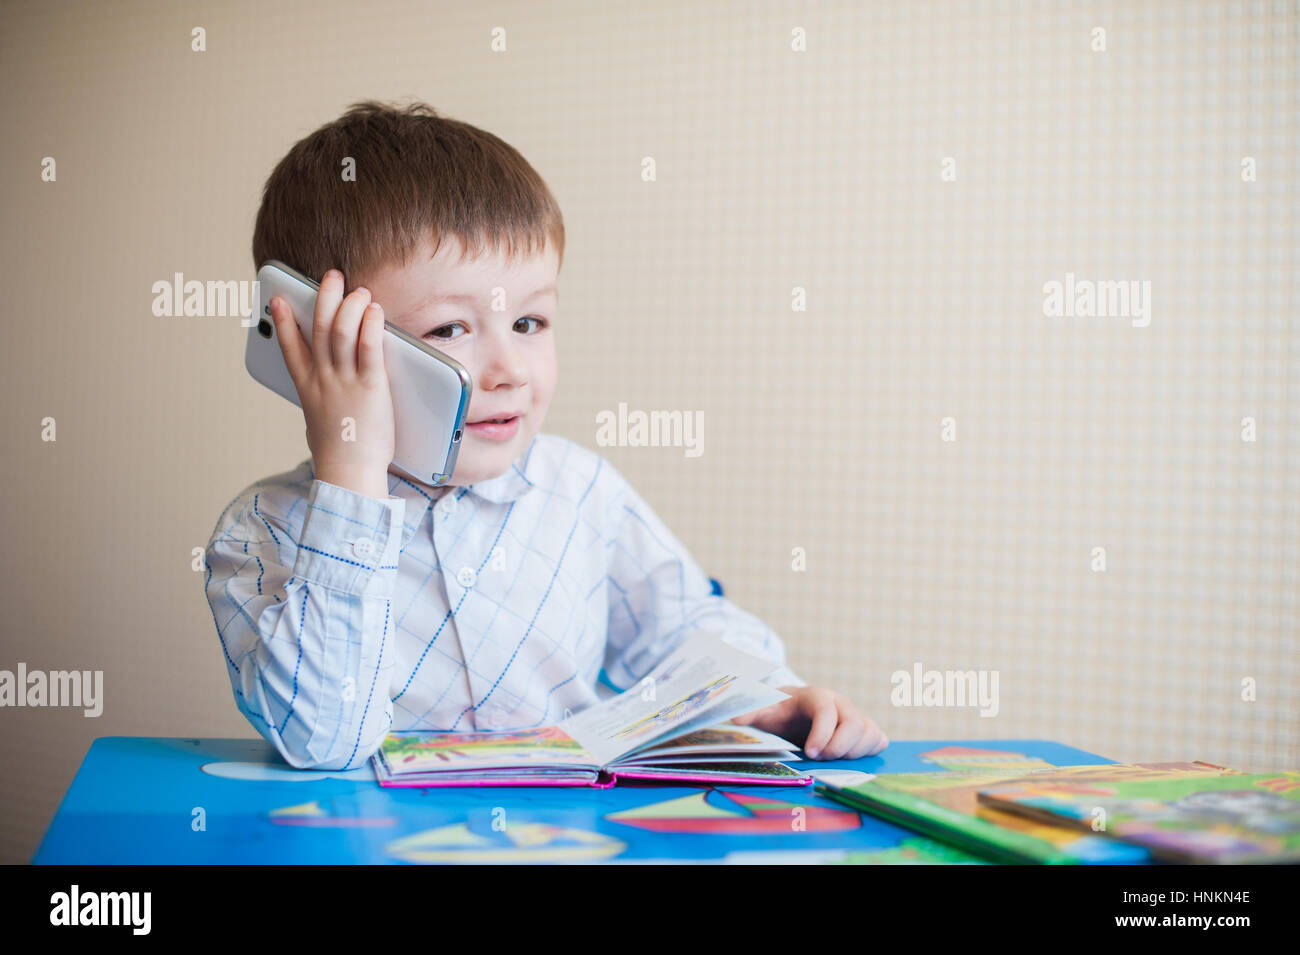 little boy sitting at desk and talking on the phone Stock Photo